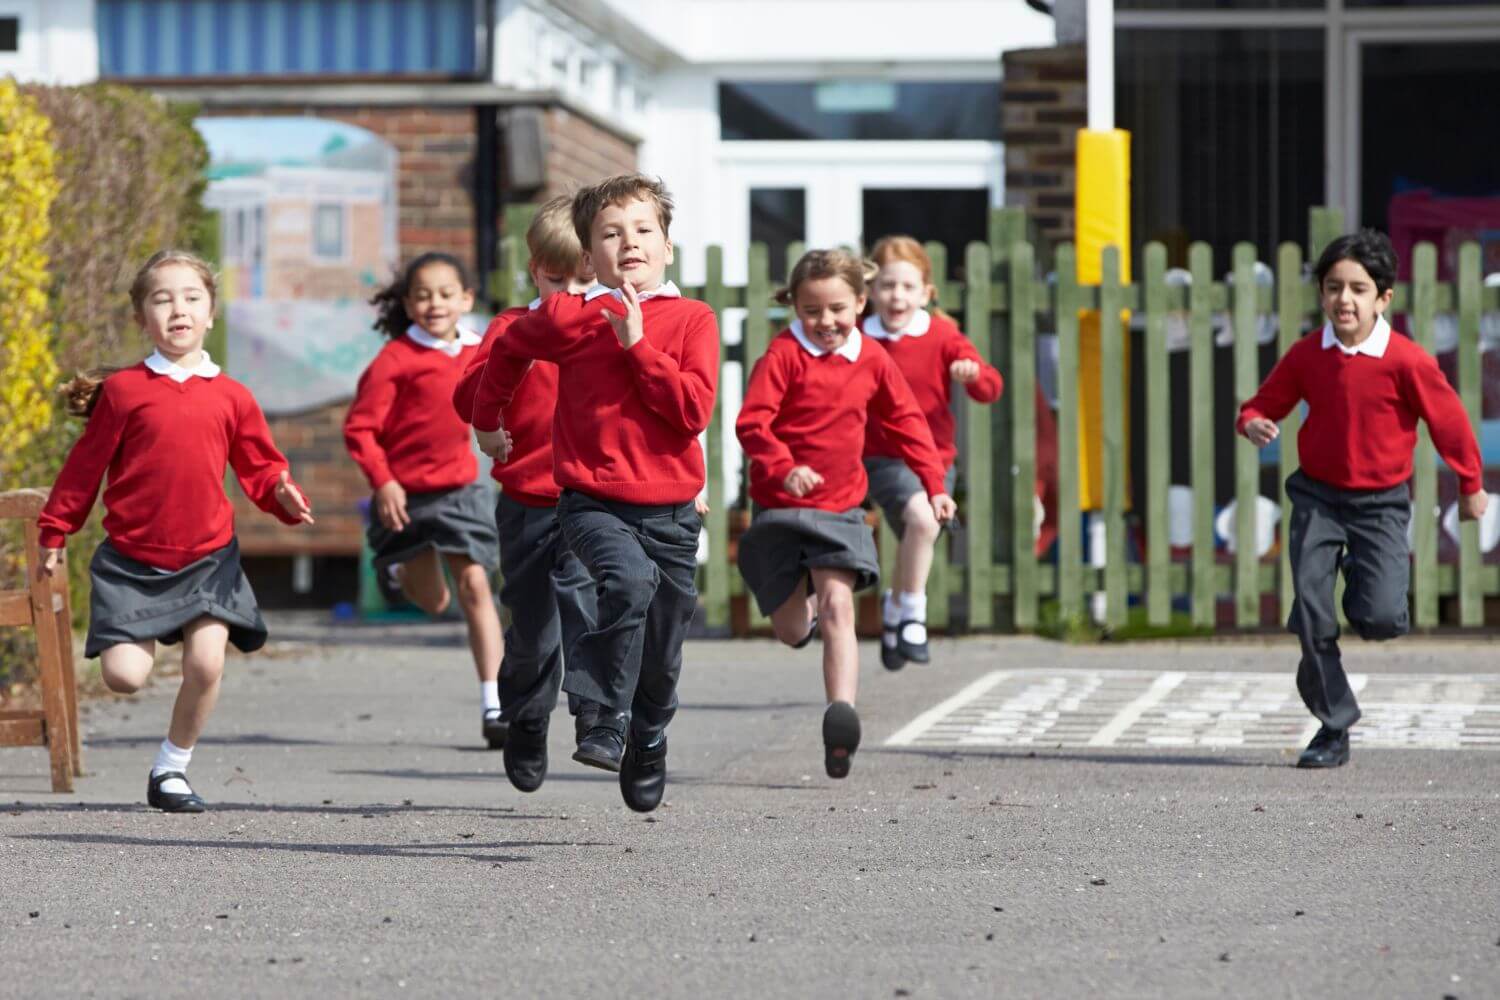 Primary school children running excitedly through their school grounds on Outdoor Classroom Day.